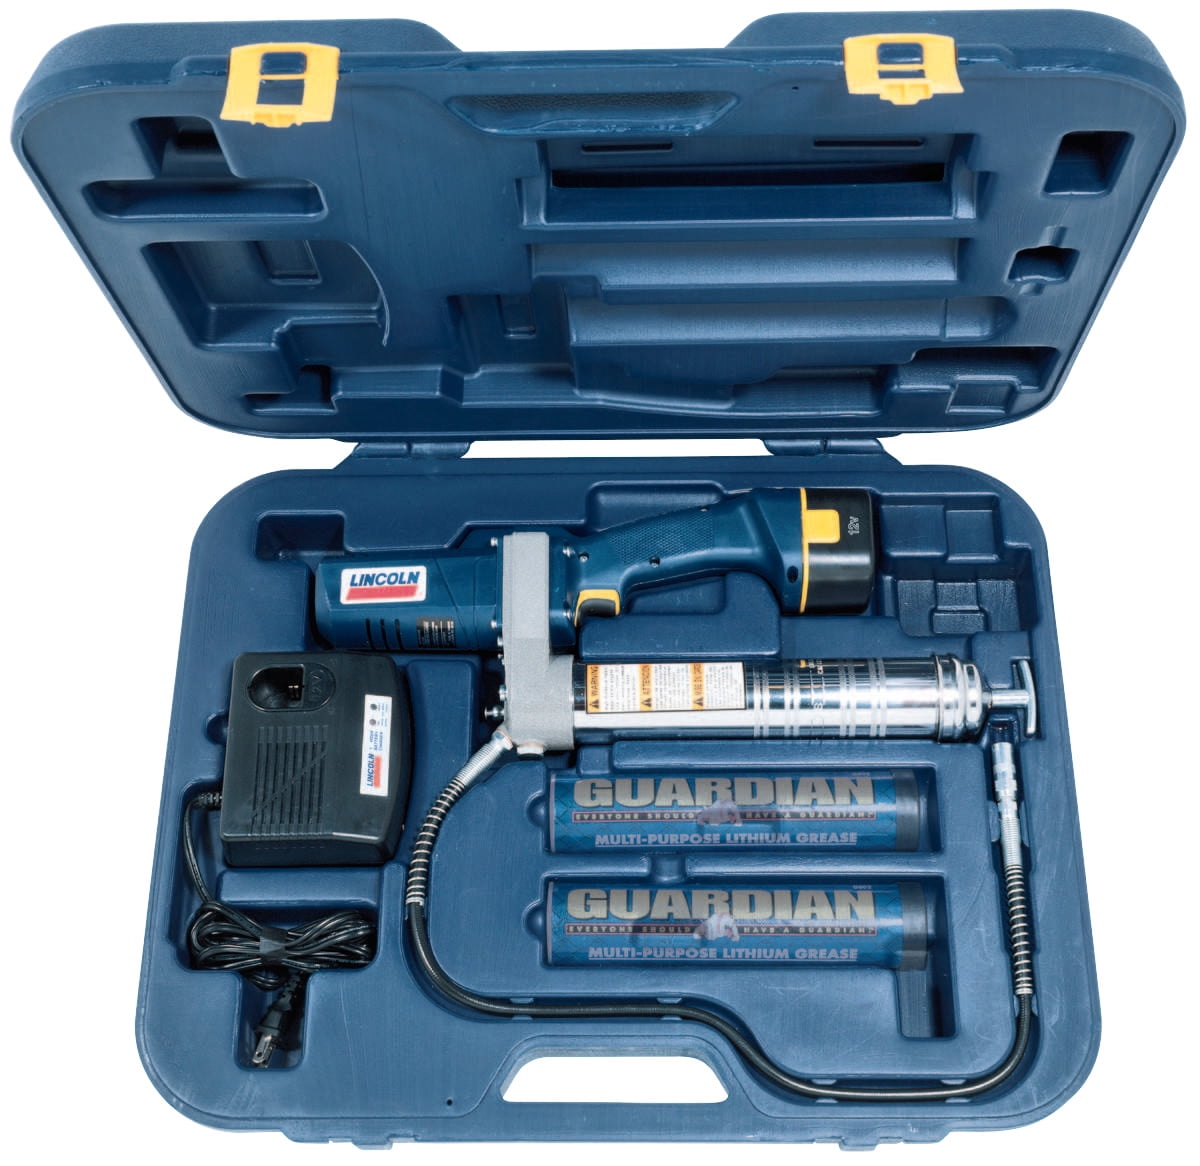 AUTO LUBER Tool POWERFUL LINCOLN Cordless Grease Gun 